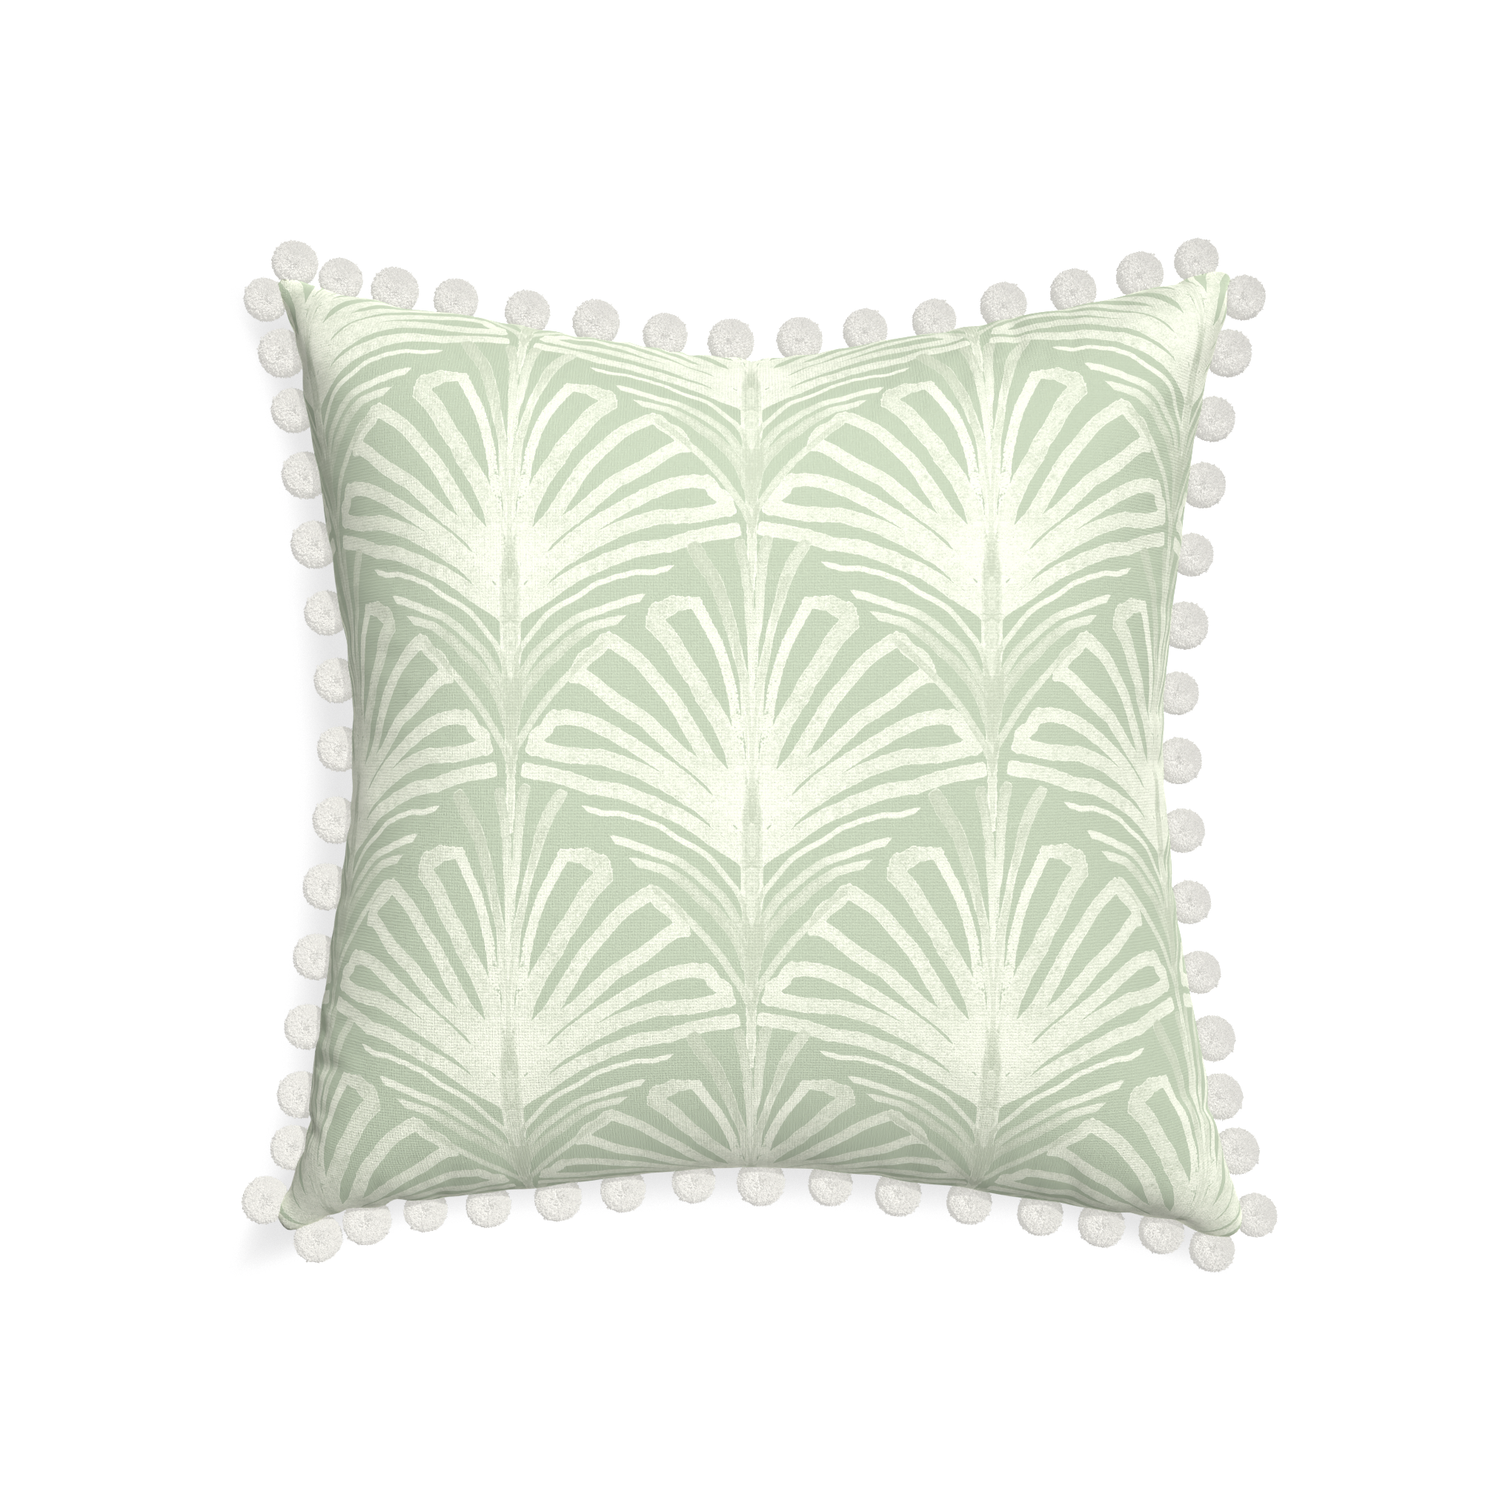 22-square suzy sage custom sage green palmpillow with snow pom pom on white background